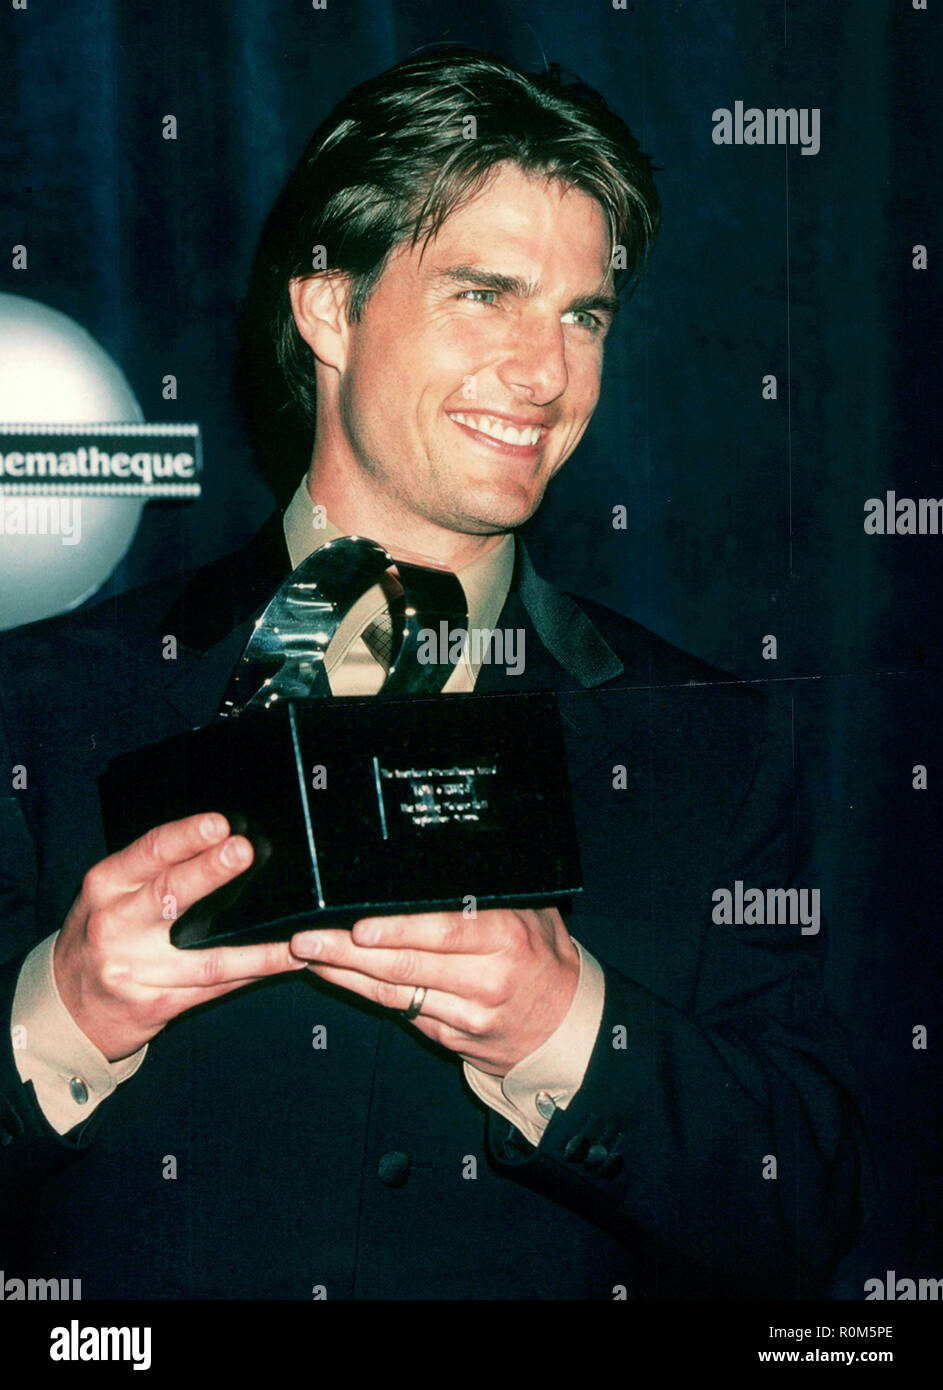 Tom Cruise and trophy ÉÉ.. Event in Hollywood Life - California, USA, Film Industry, Celebrities, Photography, Bestof, Arts Culture and Entertainment, Topix Celebrities fashion, Best of, Hollywood Life,  Red Carpet and backstage, movie celebrities, TV celebrities, Music celebrities, Topix, Bestof, Arts Culture and Entertainment, vertical, one person, Photography,   #Celebrity #Hollywood #RedCarpet #Actor #Actress #famousCelebrity #HollywoodEvent #TsuniUSA #CelebrityPhotography, Fashion inquiry tsuni@Gamma-USA.com , Credit Tsuni / USA,   Fashion, From the Year 1993 to 1999, Stock Photo